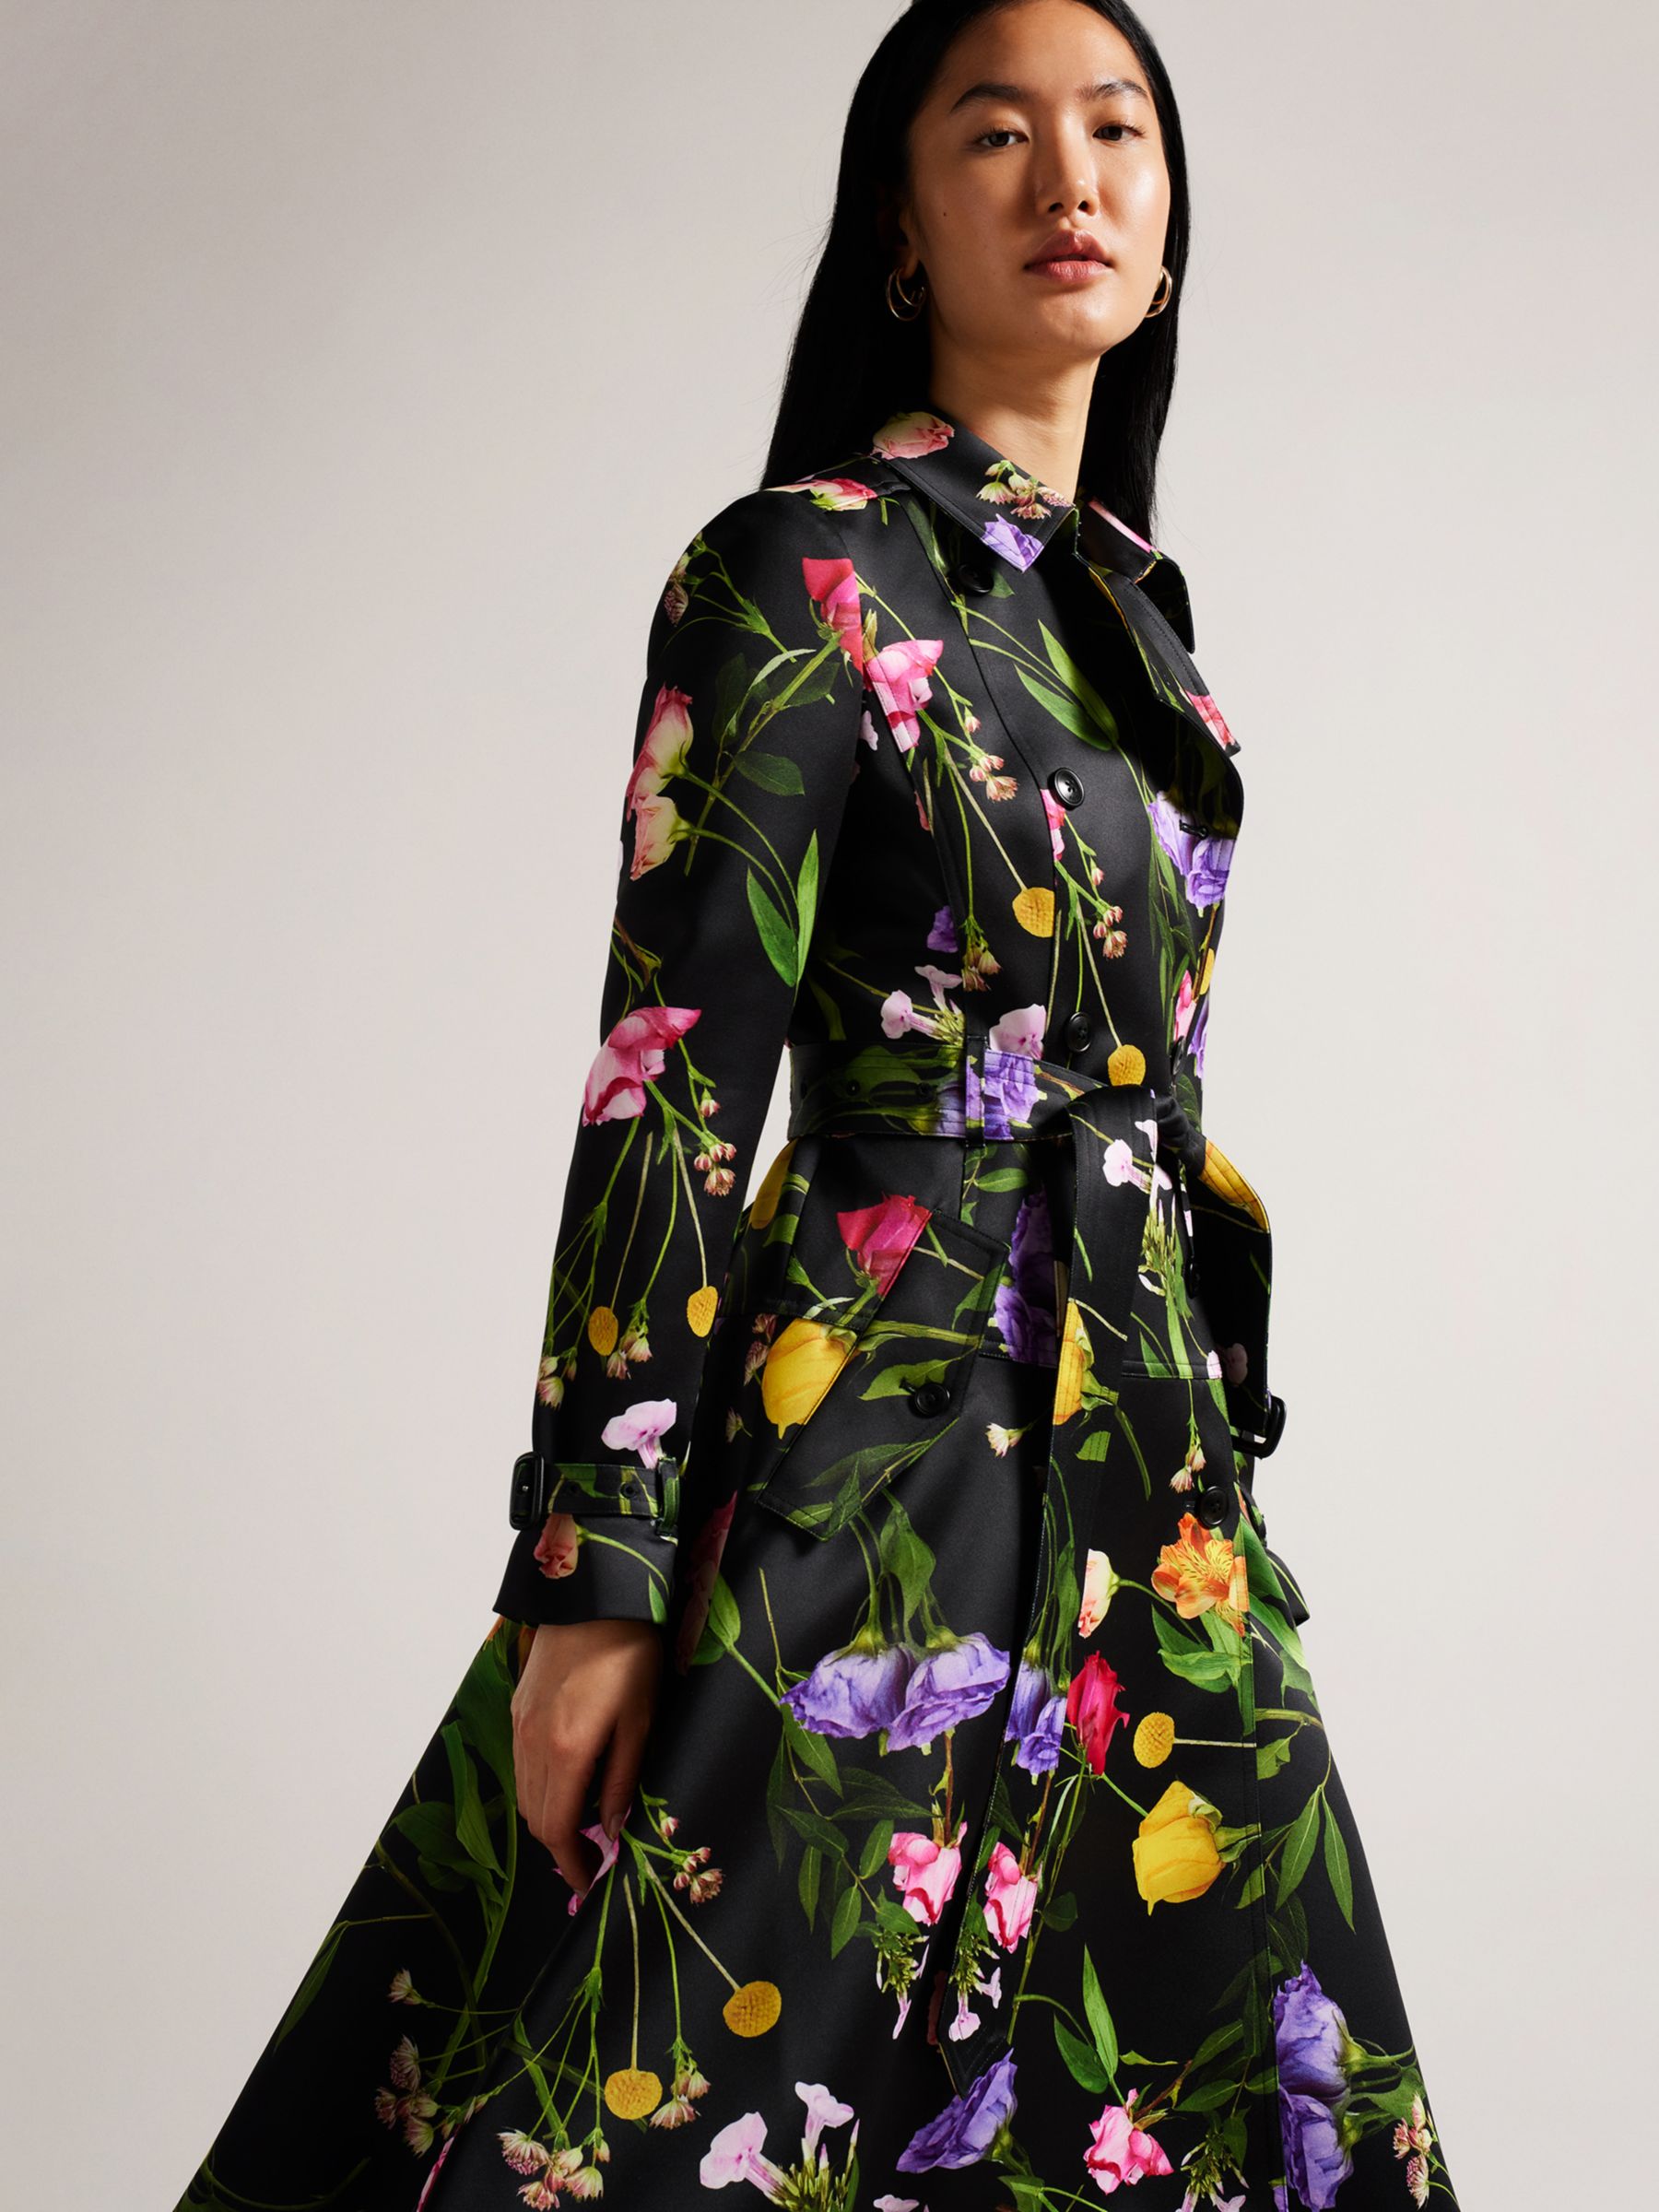 Ted Baker Moiraa Floral Print Double Breasted Trench Coat, Black/Multi, 6